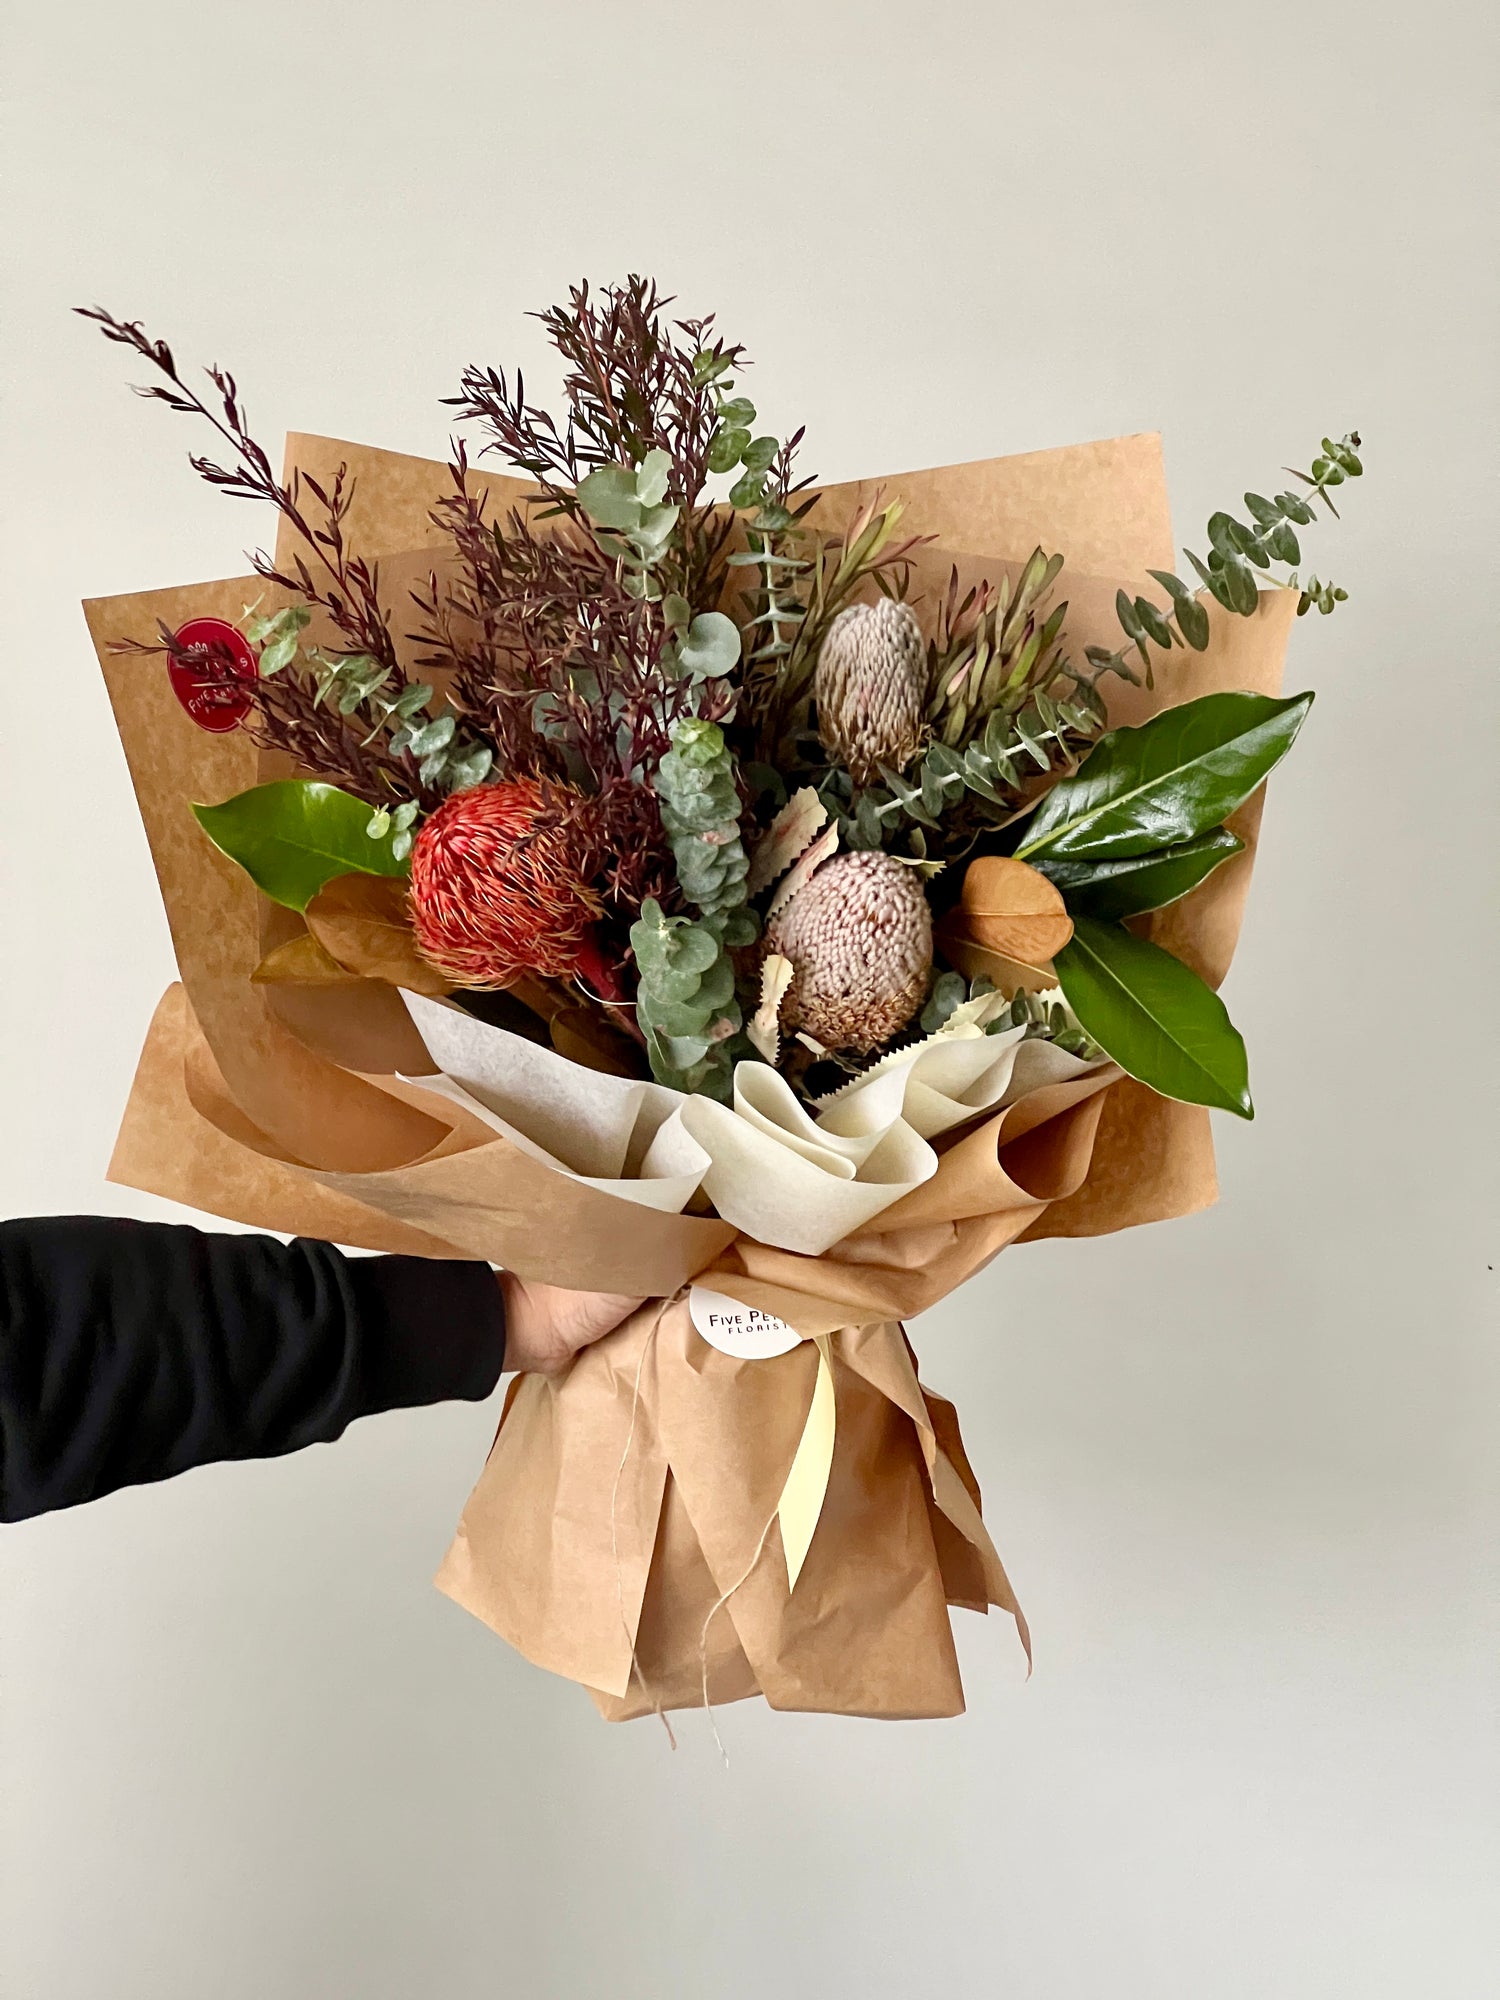 A small bouquet of native flowers with foliages wrapped in brown paper.